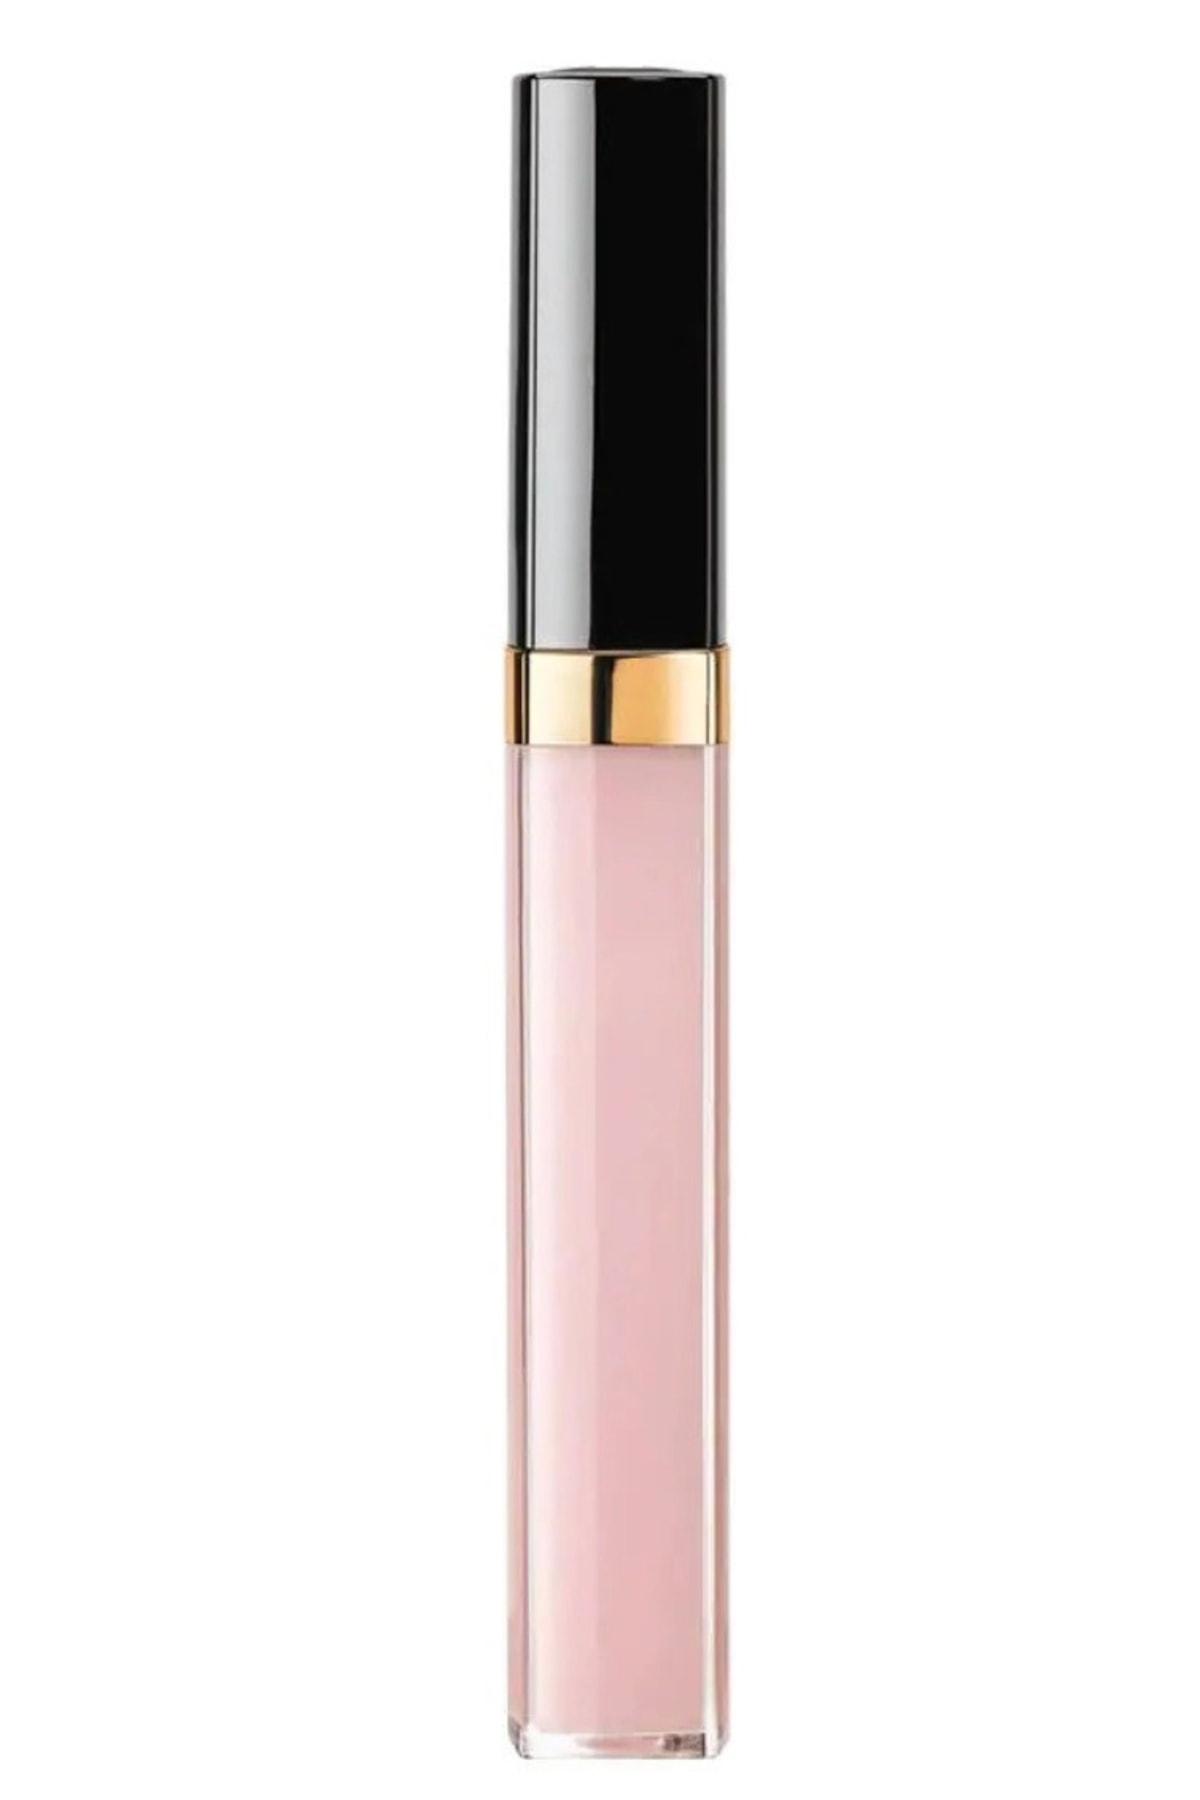 Chanel Rouge Coco Gel Gloss